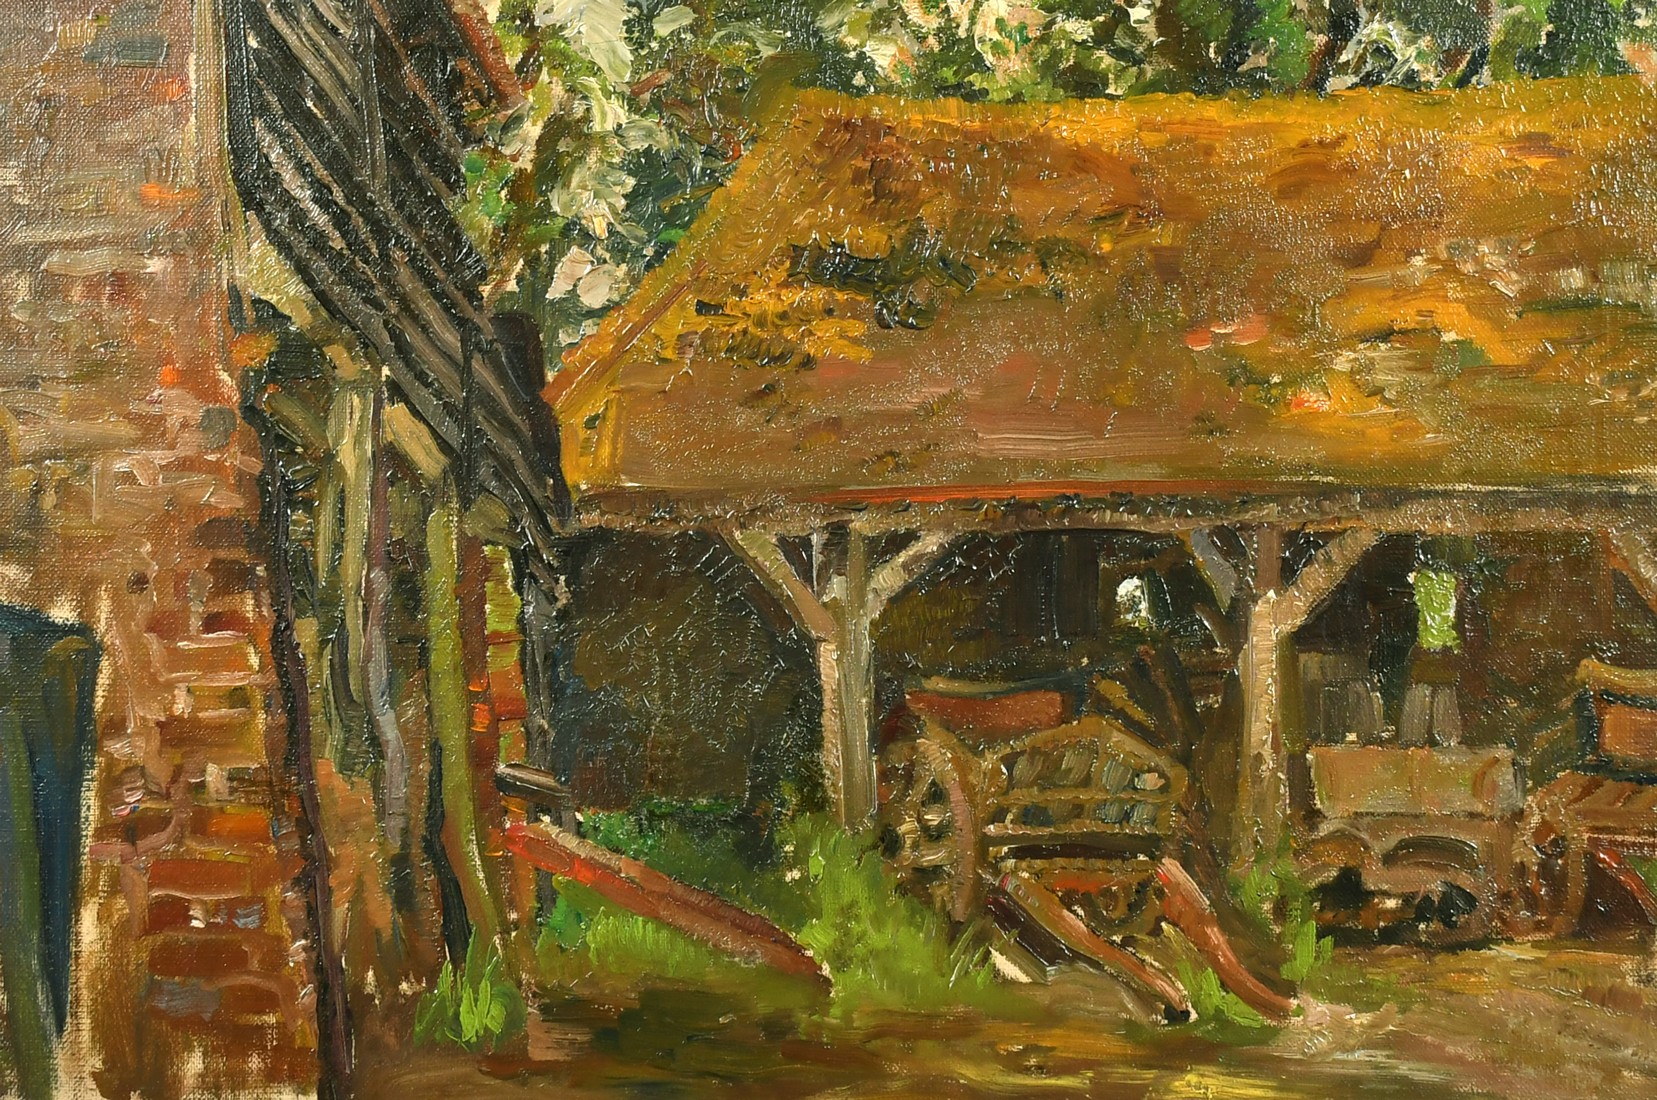 EARLY 20TH CENTURY SCHOOL. An old farm barn with carts and old car, oil on canvas, 14" x 20".